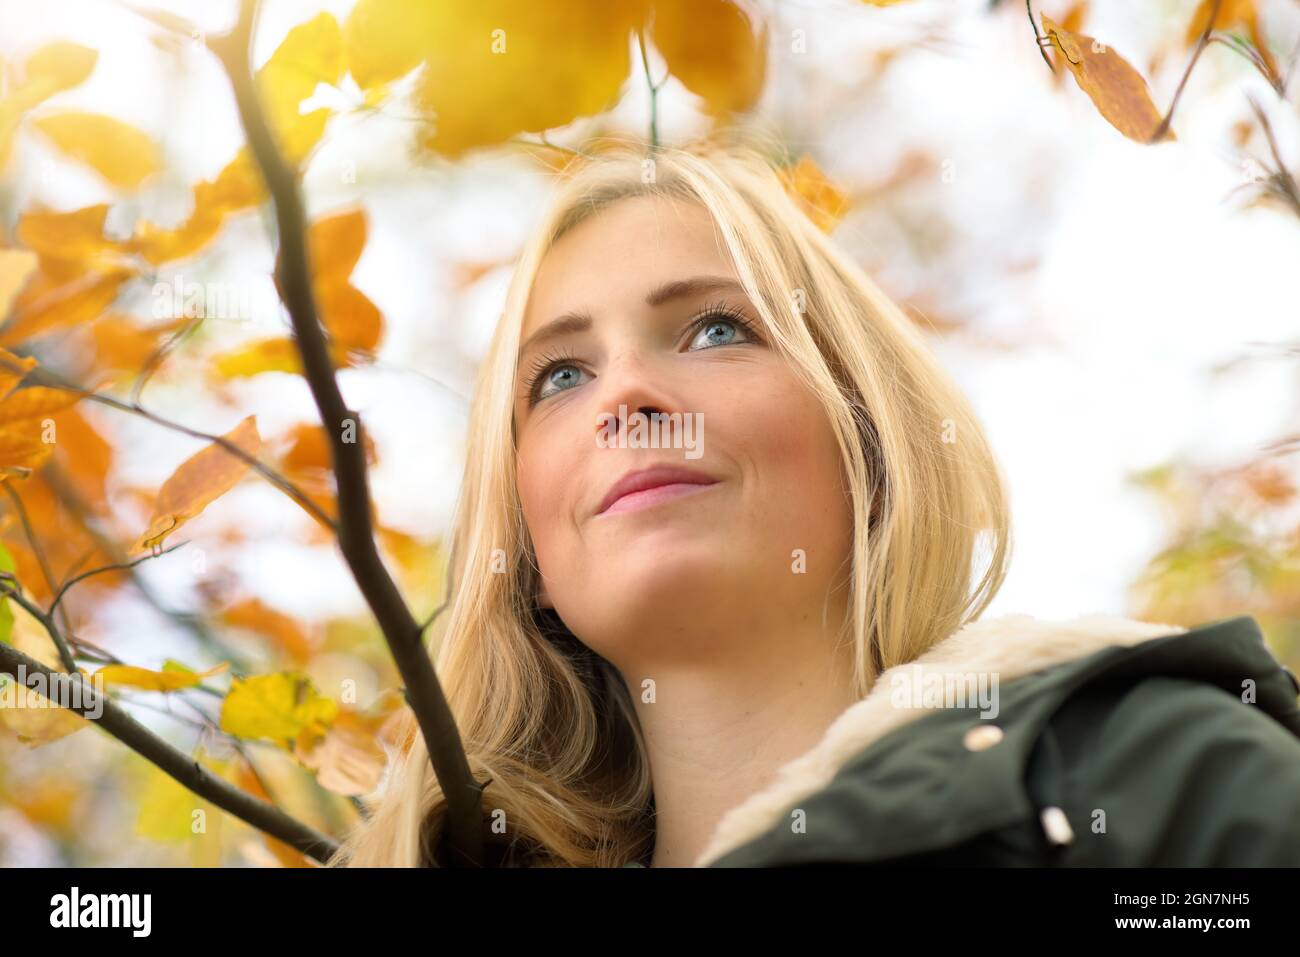 Beautiful young woman enjoying nature, smiling and looking up, framed by gold autumn leaves Stock Photo